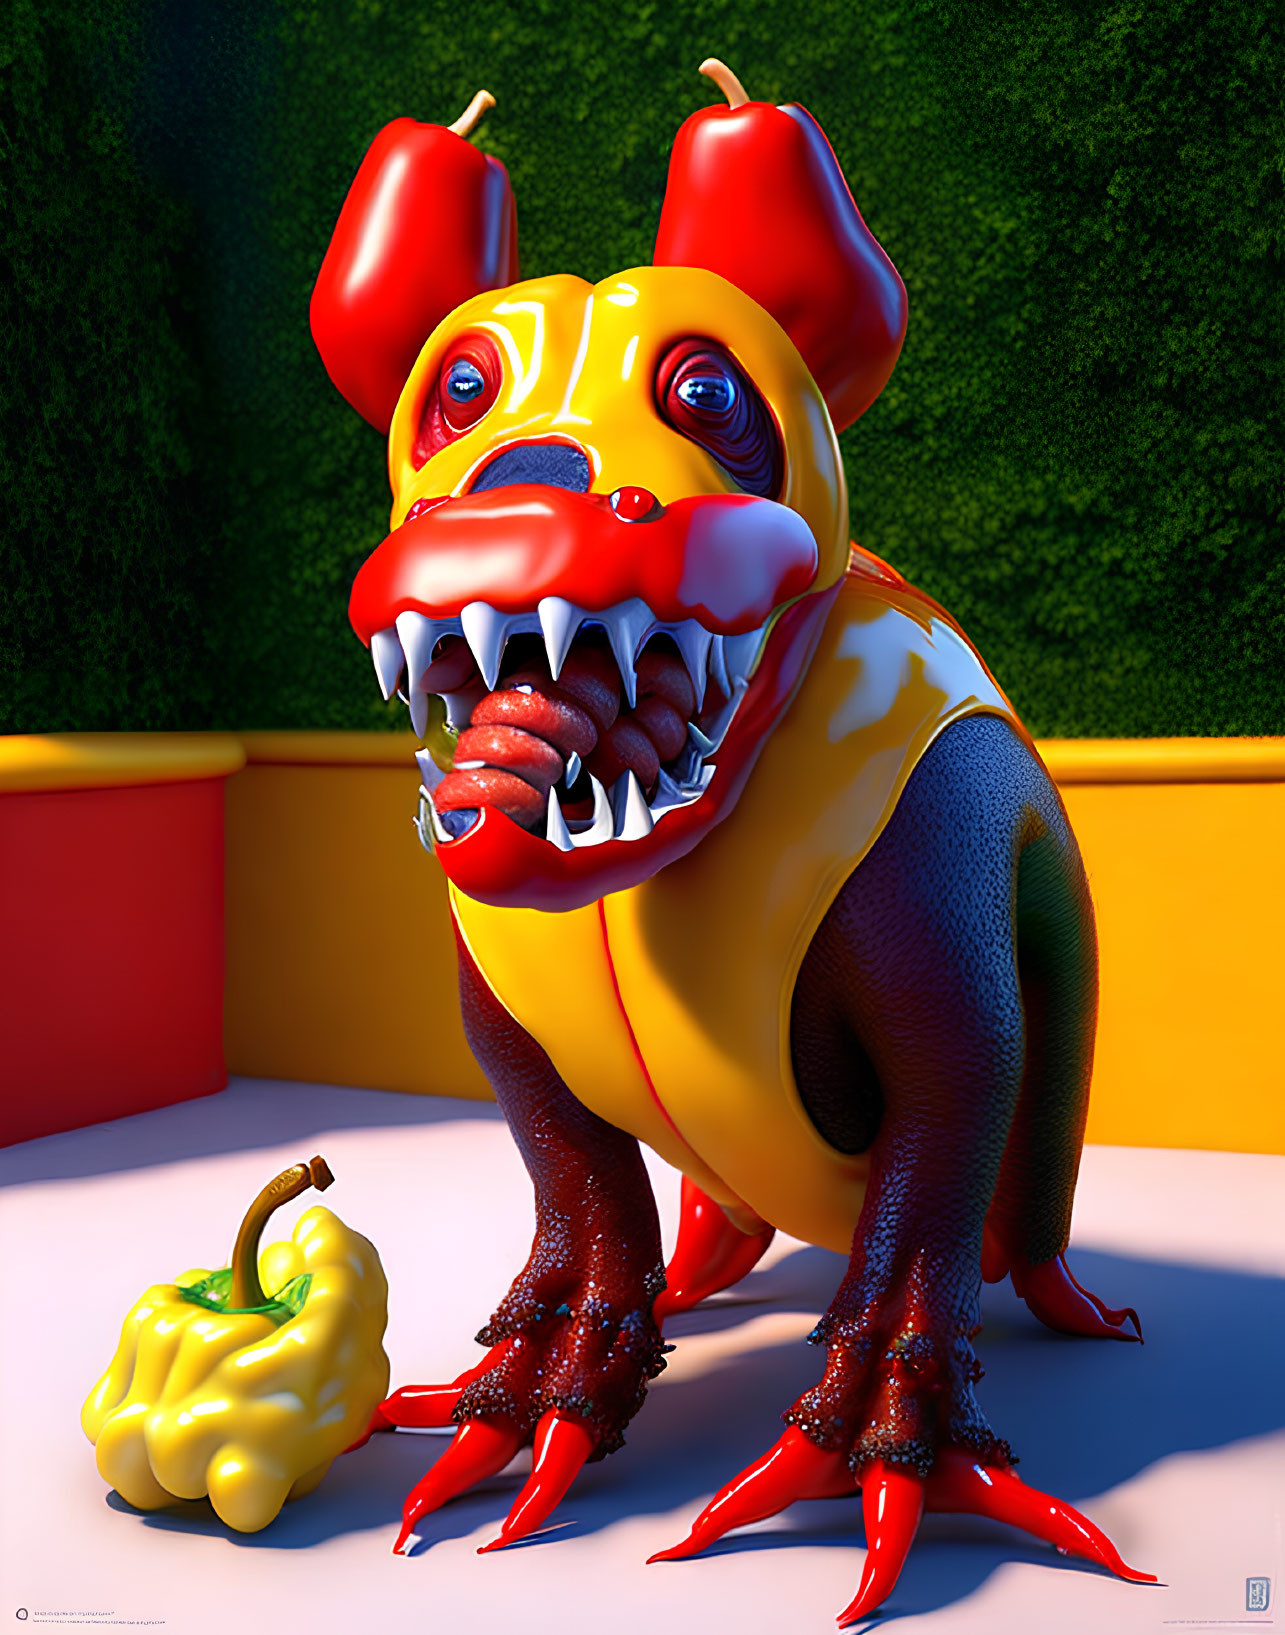 Vibrant 3D Cartoon Dog Creature with Red Horns and Lemon